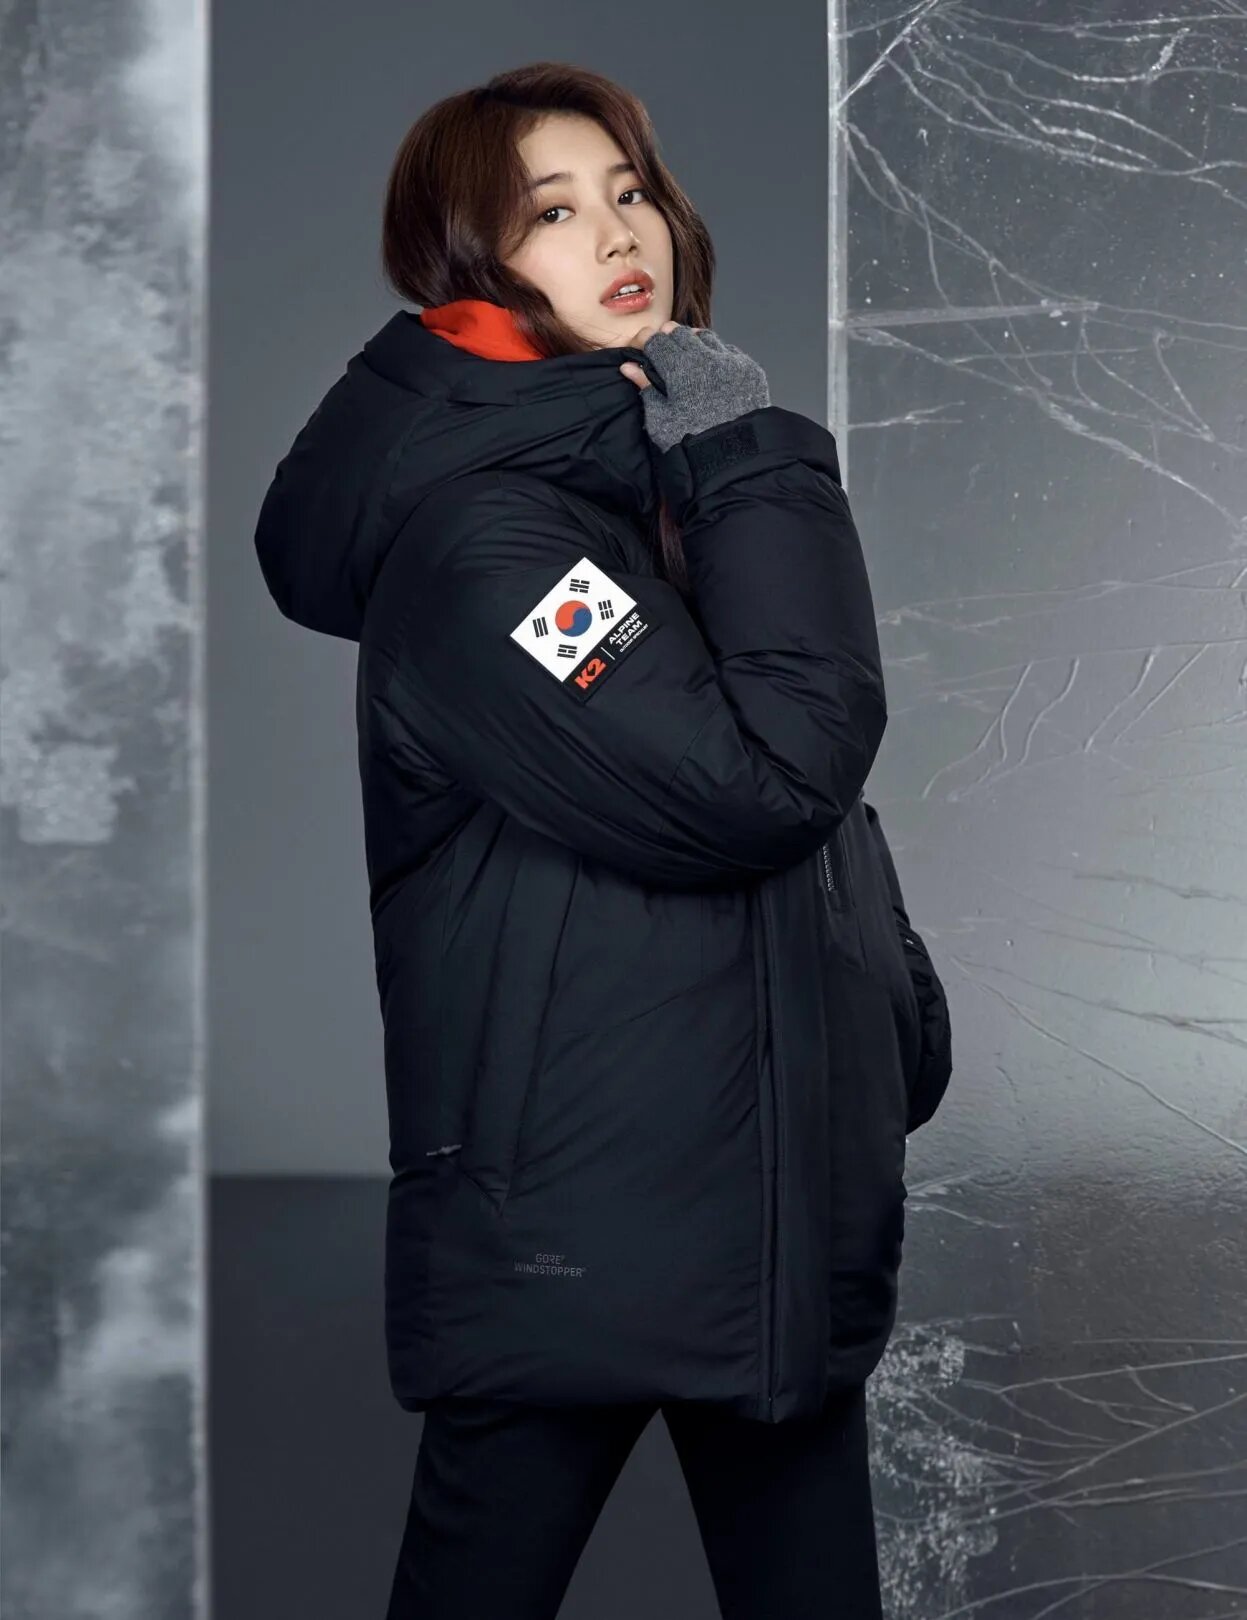 Suzy for K2 | kpopping